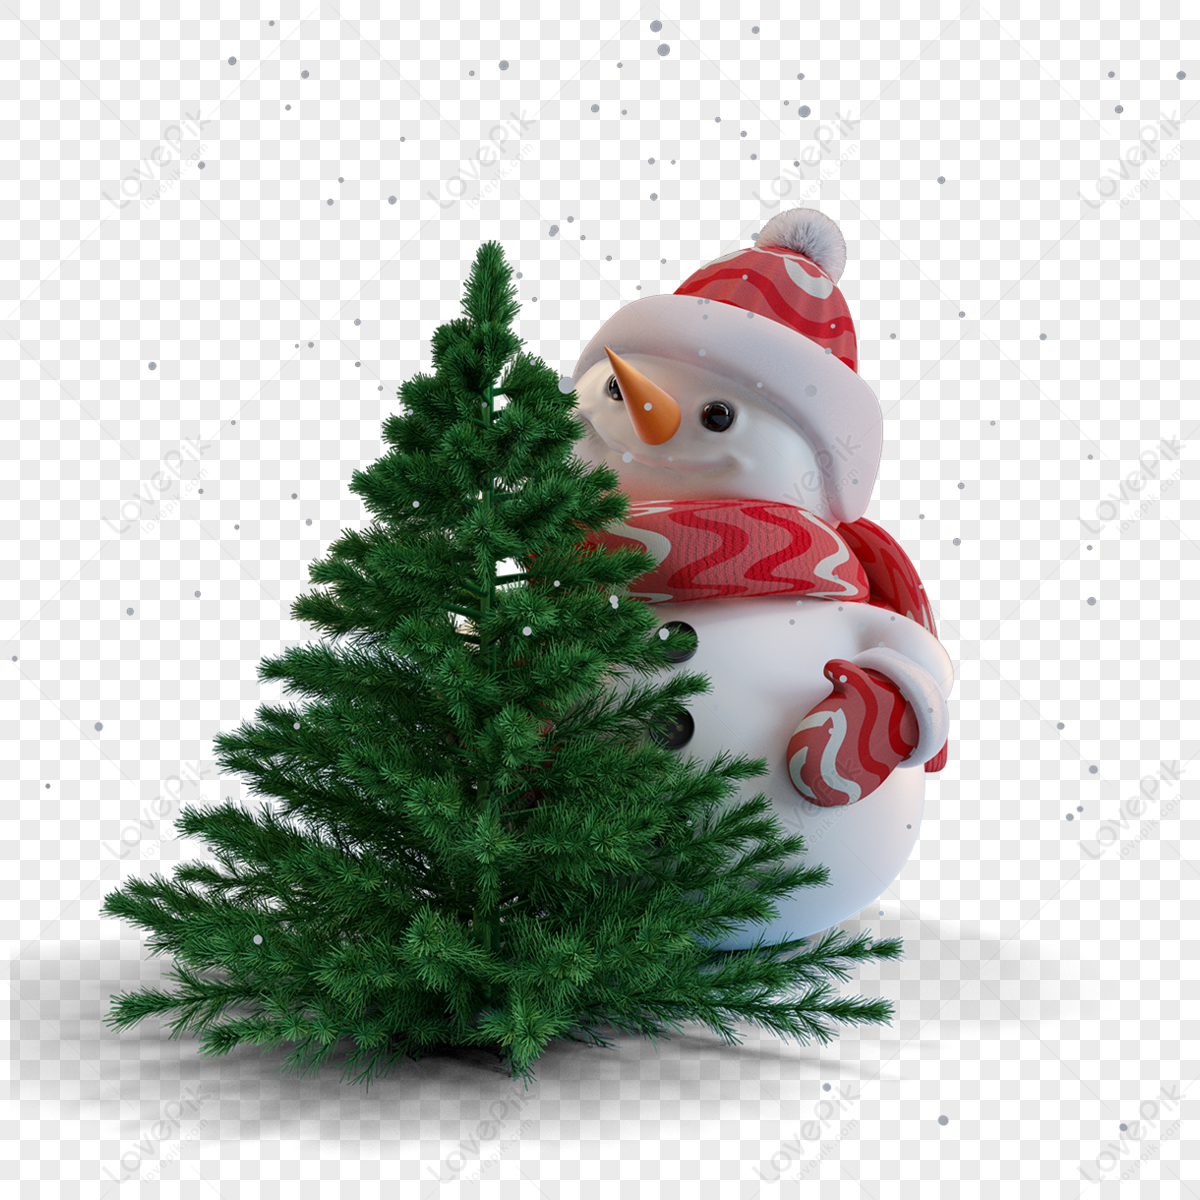 Christmas Material PNG Picture, Christmas Material, Snowman, Candy,  Christmas Tree PNG Image For Free Download